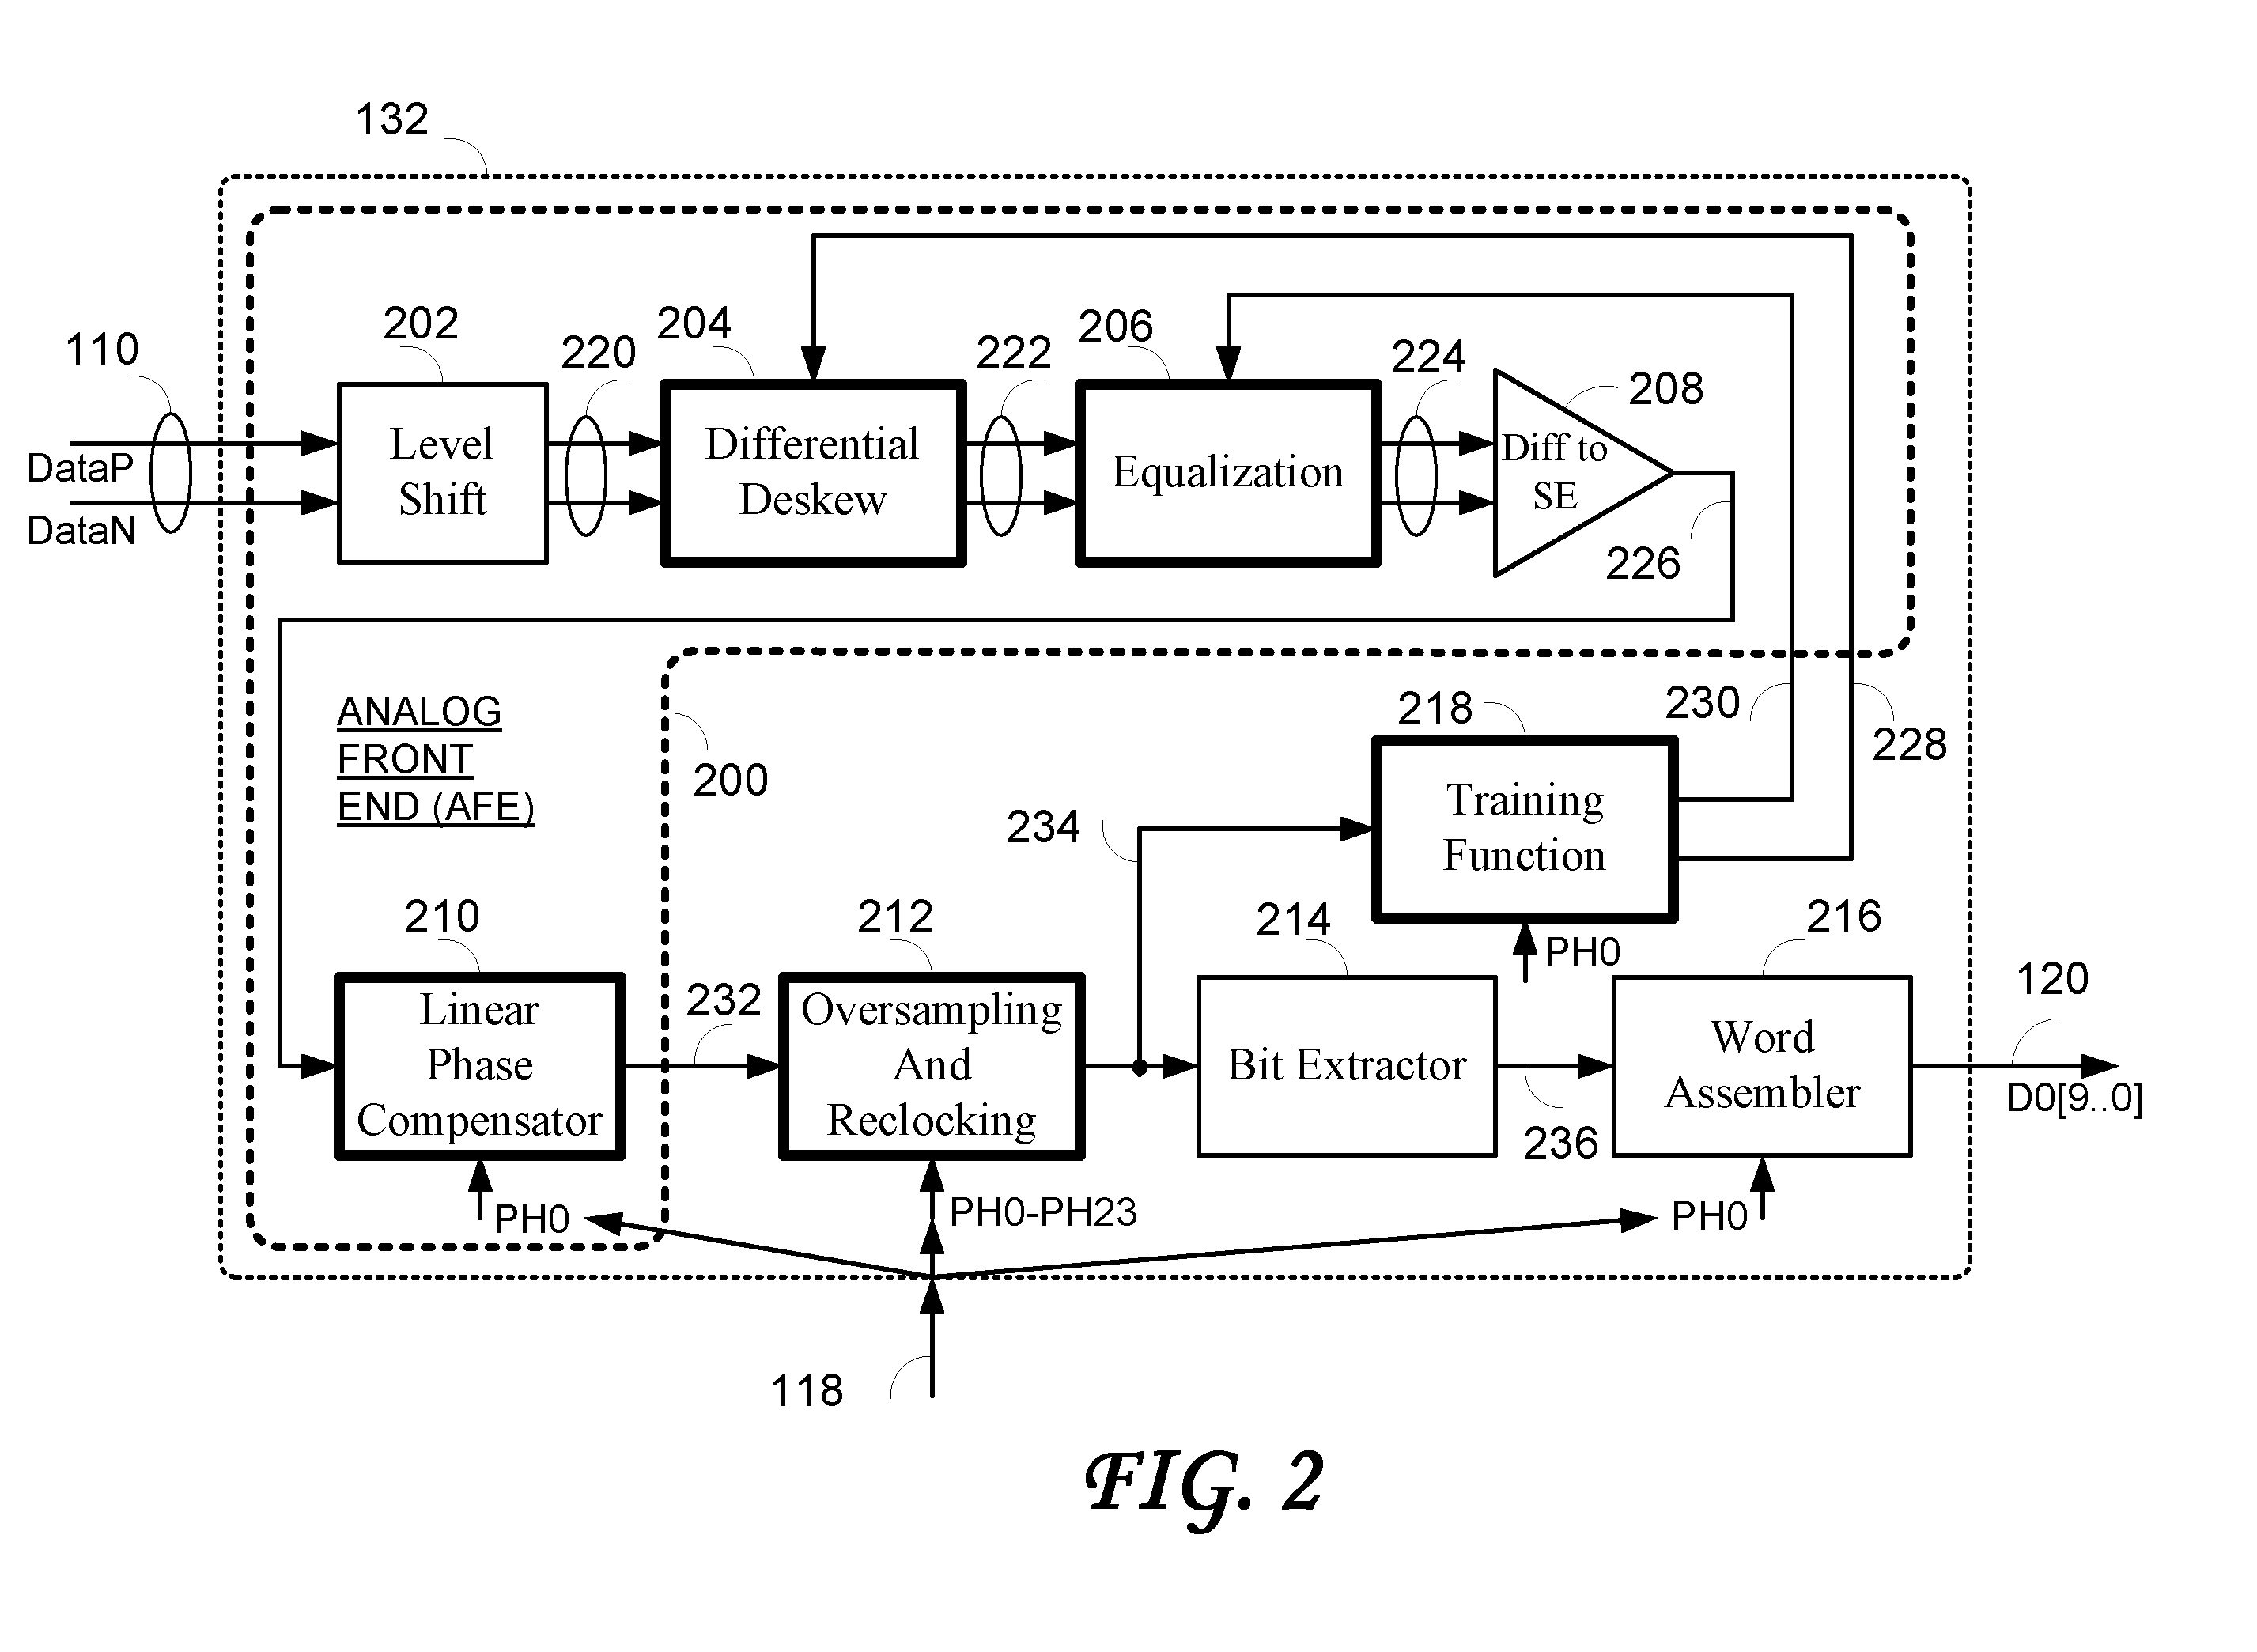 Data recovery system for source synchronous data channels